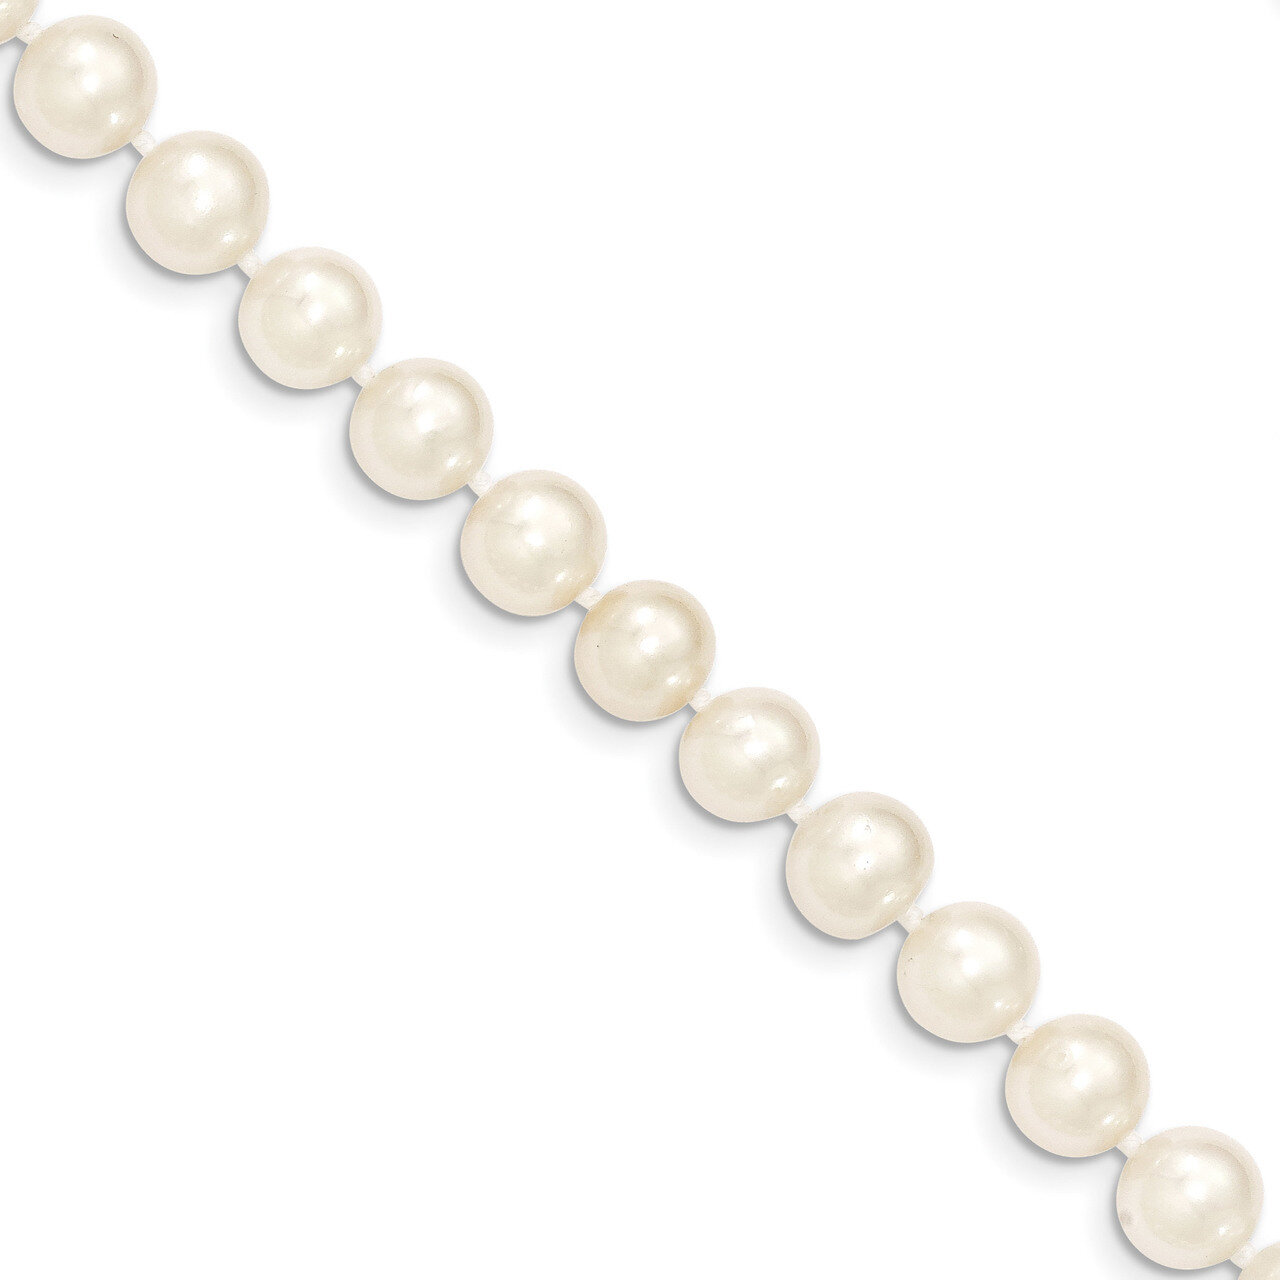 20 Inch 8-9mm White Near Round Fresh Water Cultured Pearl Necklace 14k Gold WPN080-20